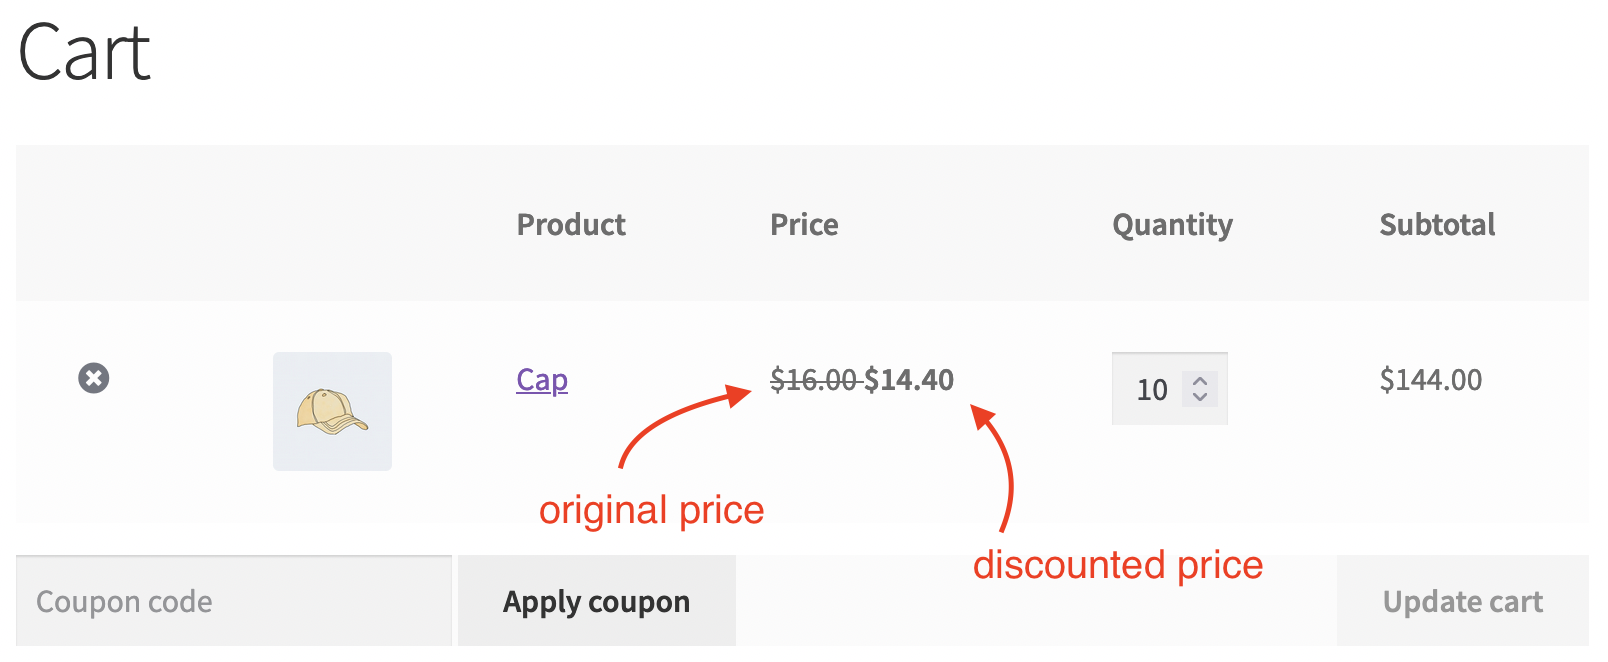 Discounted Price in the shopping cart